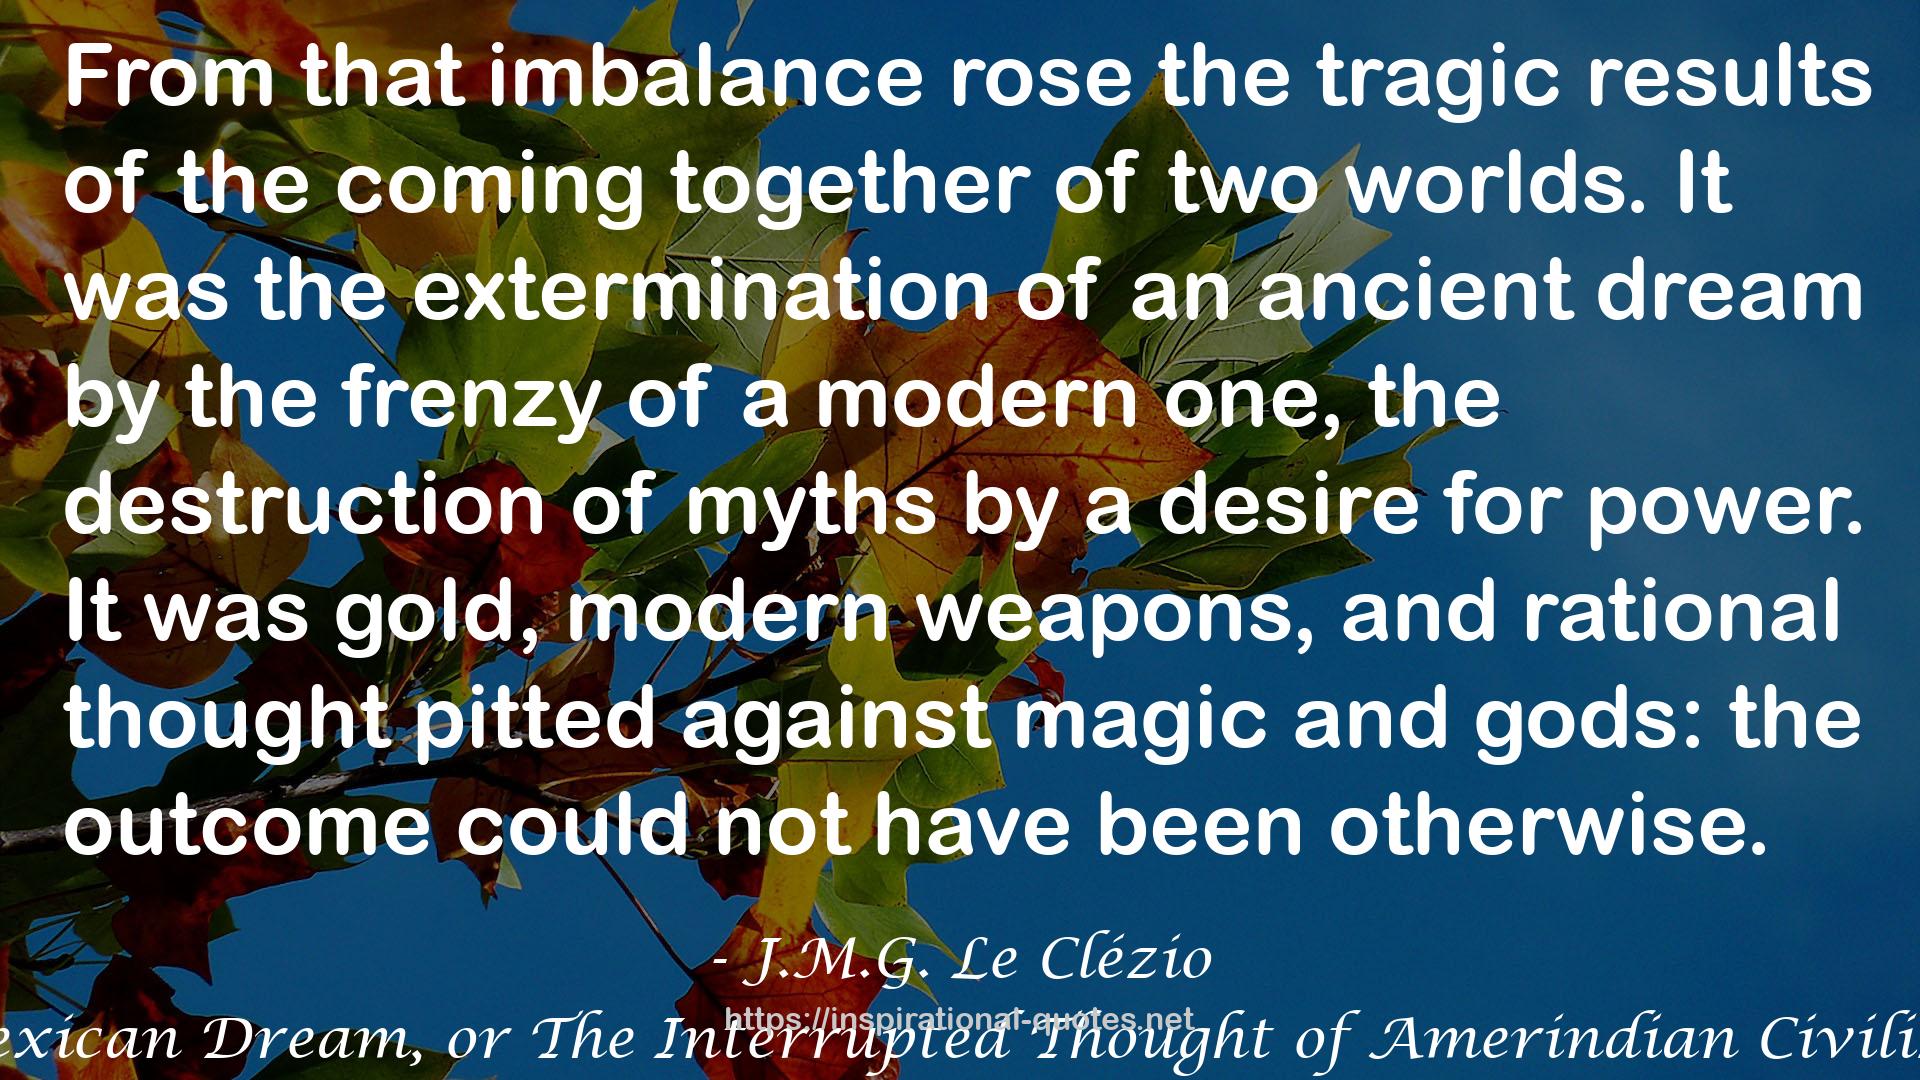 The Mexican Dream, or The Interrupted Thought of Amerindian Civilizations QUOTES